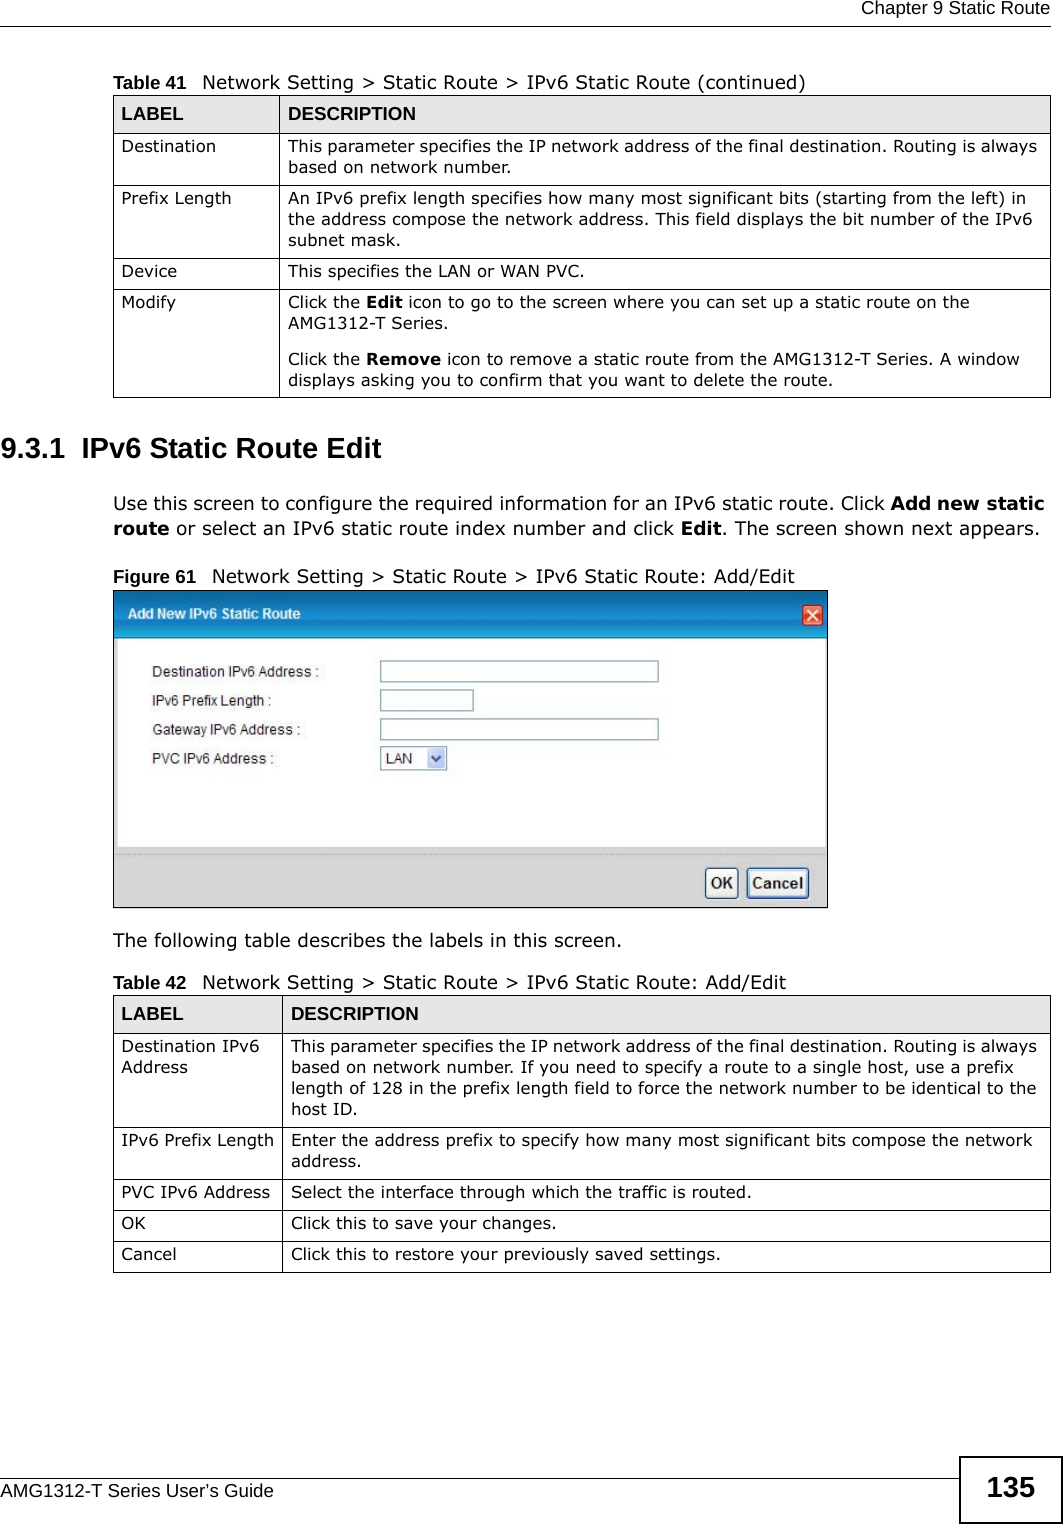  Chapter 9 Static RouteAMG1312-T Series User’s Guide 1359.3.1  IPv6 Static Route Edit   Use this screen to configure the required information for an IPv6 static route. Click Add new static route or select an IPv6 static route index number and click Edit. The screen shown next appears.Figure 61   Network Setting &gt; Static Route &gt; IPv6 Static Route: Add/EditThe following table describes the labels in this screen. Destination This parameter specifies the IP network address of the final destination. Routing is always based on network number. Prefix Length An IPv6 prefix length specifies how many most significant bits (starting from the left) in the address compose the network address. This field displays the bit number of the IPv6 subnet mask.Device This specifies the LAN or WAN PVC.Modify Click the Edit icon to go to the screen where you can set up a static route on the AMG1312-T Series.Click the Remove icon to remove a static route from the AMG1312-T Series. A window displays asking you to confirm that you want to delete the route. Table 41   Network Setting &gt; Static Route &gt; IPv6 Static Route (continued)LABEL DESCRIPTIONTable 42   Network Setting &gt; Static Route &gt; IPv6 Static Route: Add/EditLABEL DESCRIPTIONDestination IPv6 AddressThis parameter specifies the IP network address of the final destination. Routing is always based on network number. If you need to specify a route to a single host, use a prefix length of 128 in the prefix length field to force the network number to be identical to the host ID.IPv6 Prefix Length Enter the address prefix to specify how many most significant bits compose the network address.PVC IPv6 Address Select the interface through which the traffic is routed.OK Click this to save your changes.Cancel Click this to restore your previously saved settings.